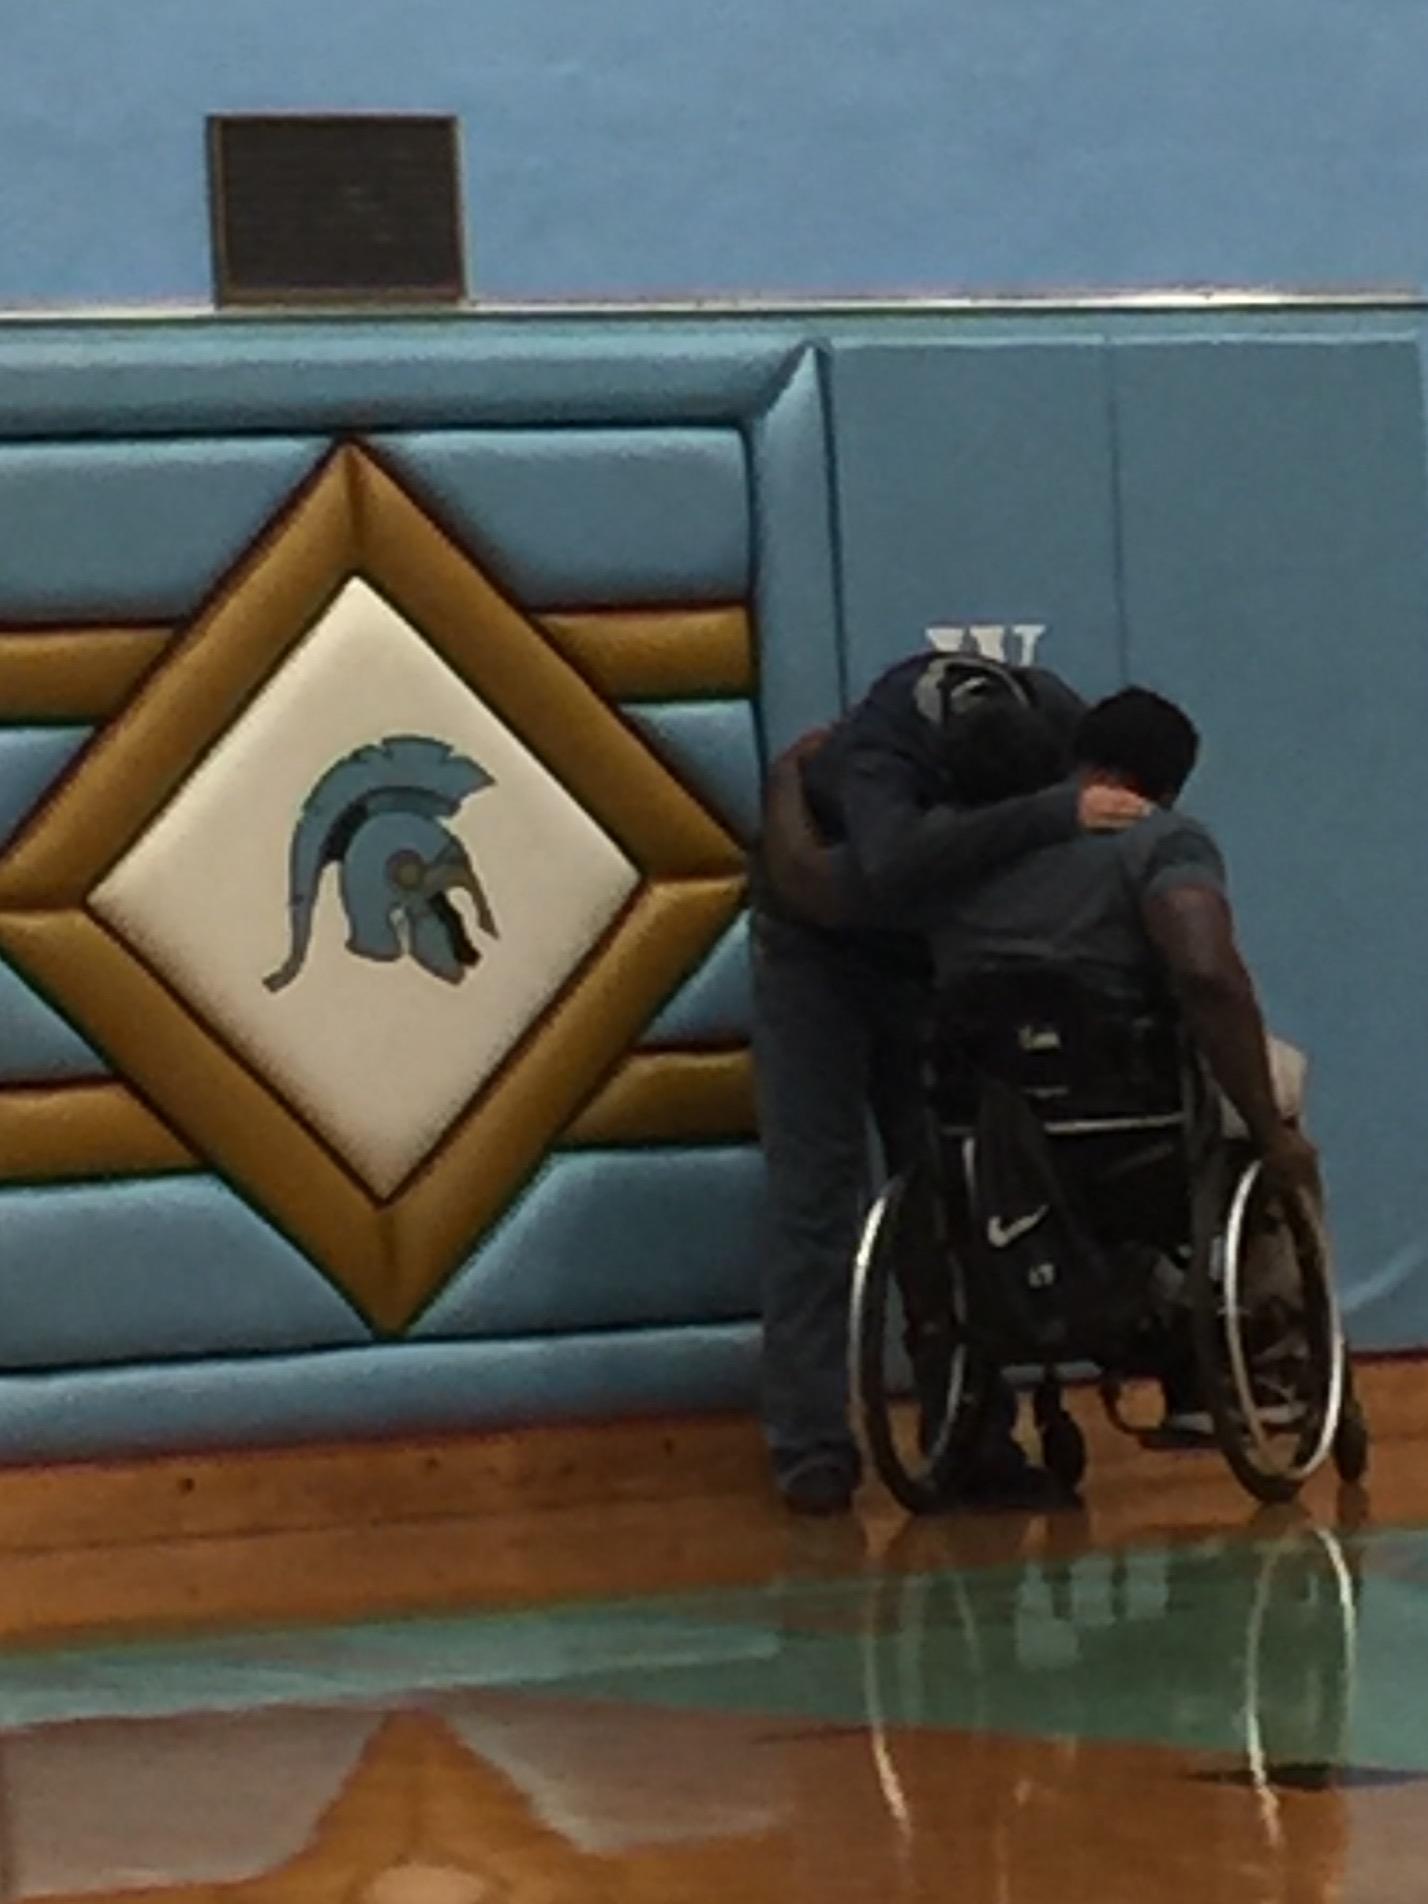 Guest speaker Timothy Alexander consoles a student who was brought to tears by his presentation on Thursday at Greeley West High School